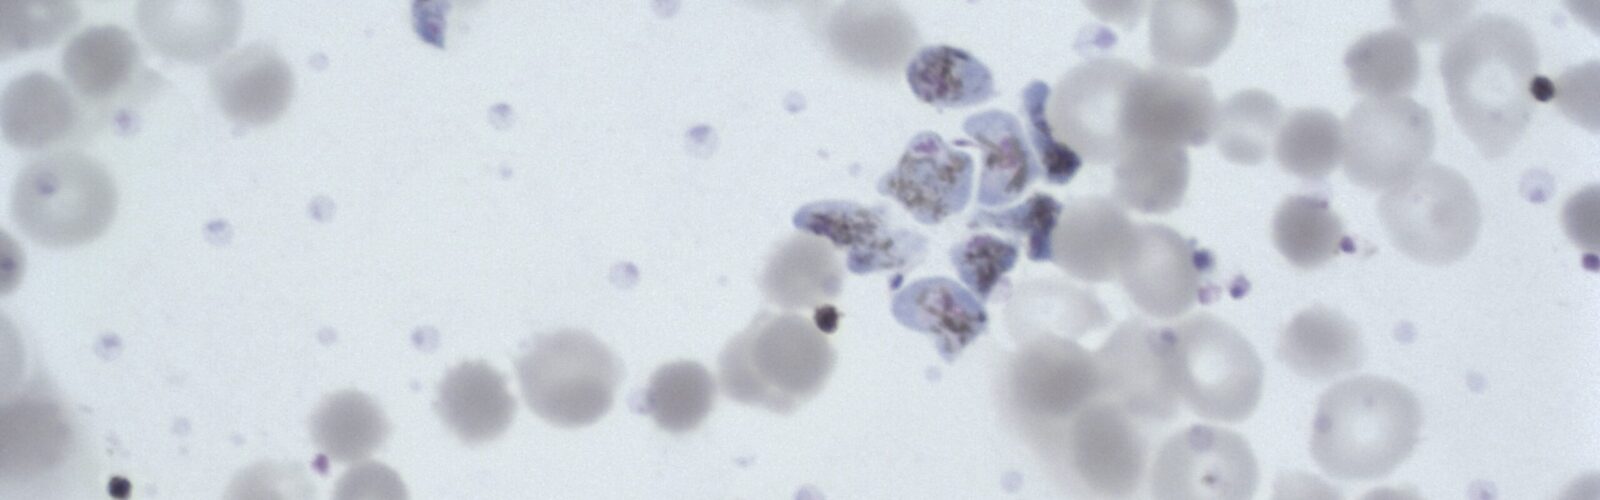 Exflagellating Giemsa stained male